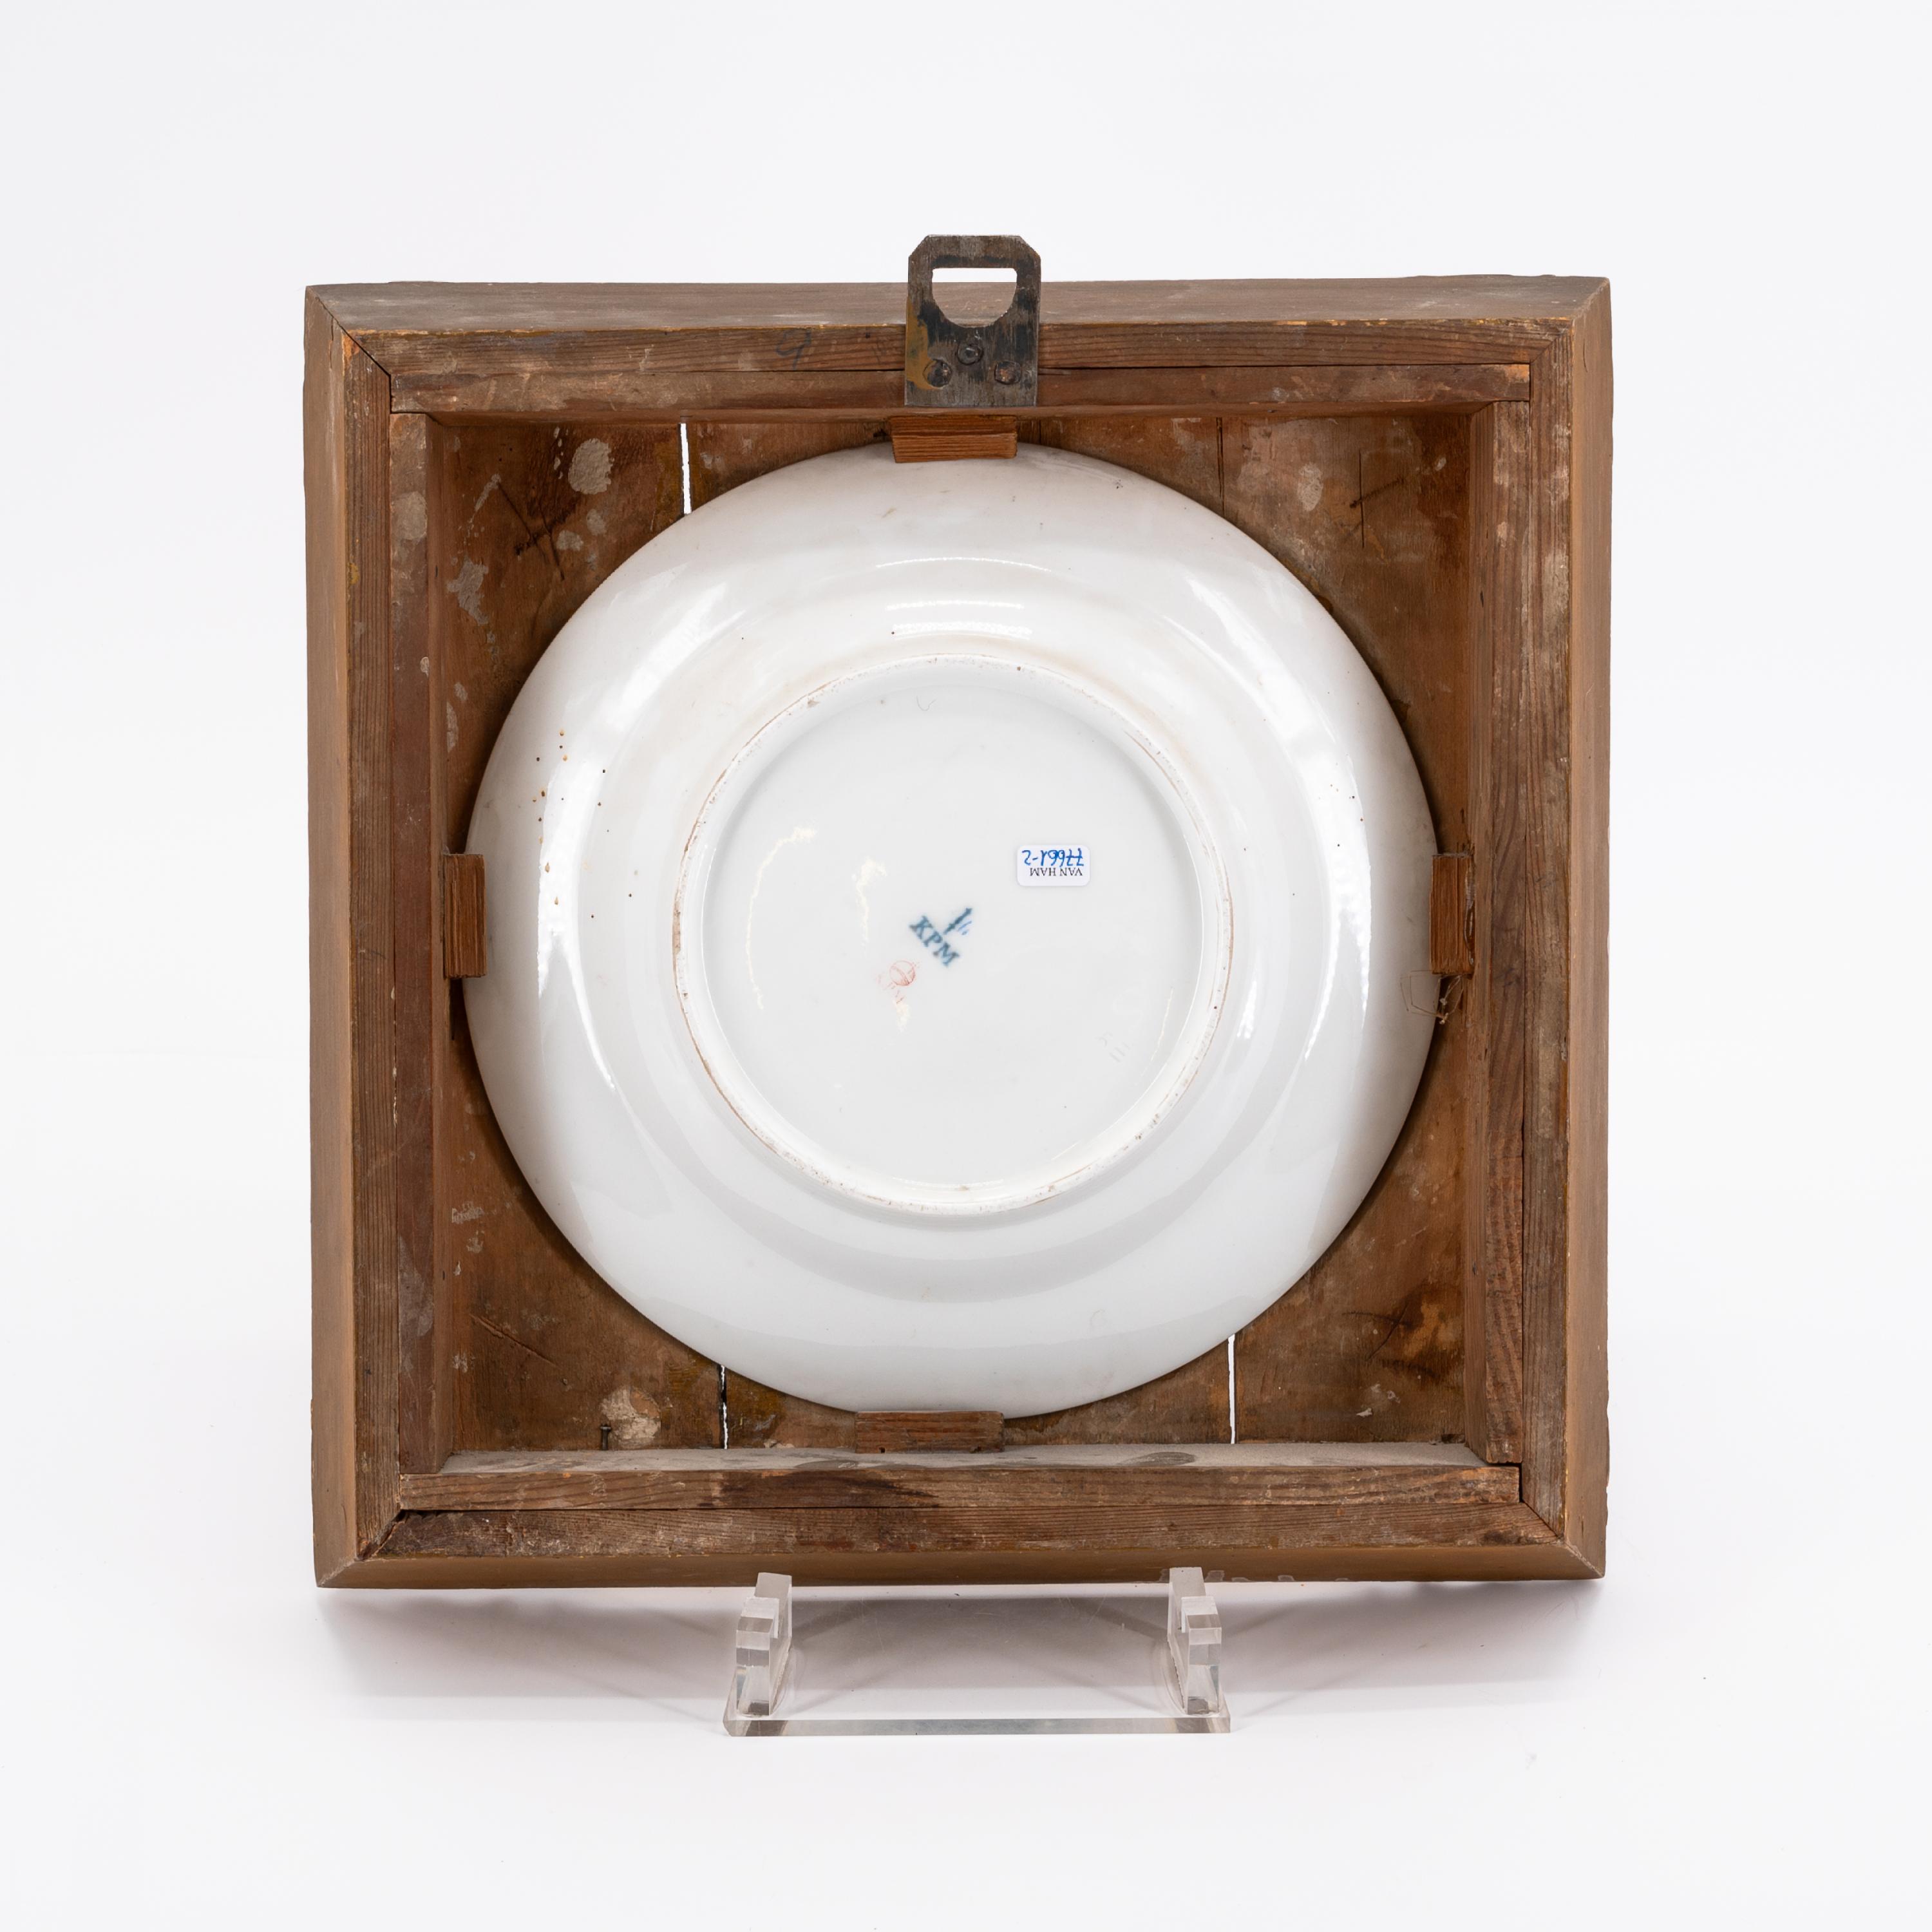 EXEPTIONAL SERIES OF TWELVE PORCELAIN PLATES WITH ROMANTIC VIEWS OF THE RHINE - Image 24 of 26